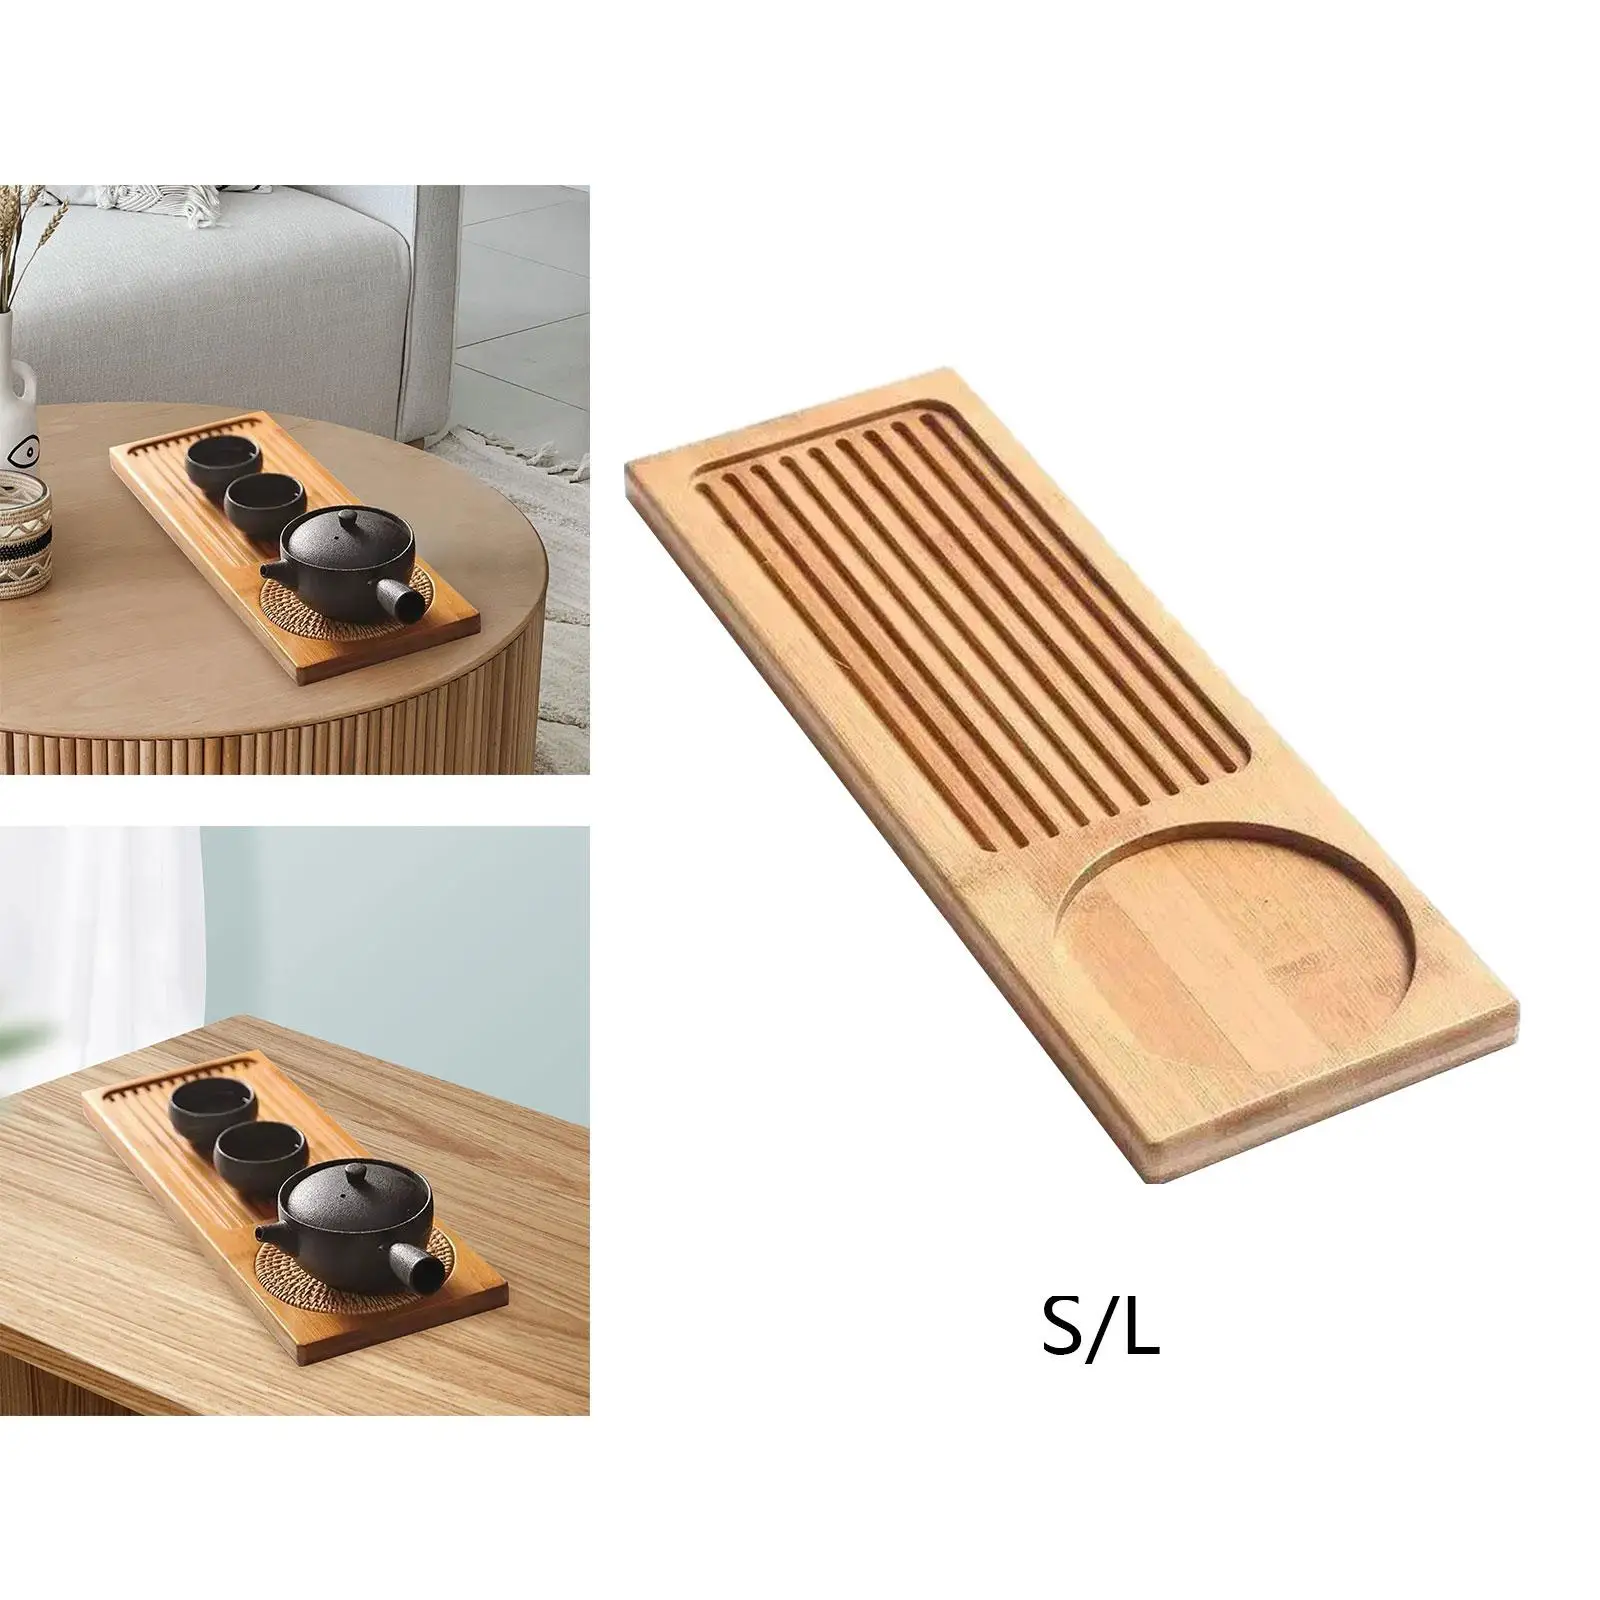 Bamboo Tea Tray Rustic Decoration Simple Easy to Clean for Tea Lover Tea Accessory Bamboo Chinese Tea Tray Tea Serving Tray